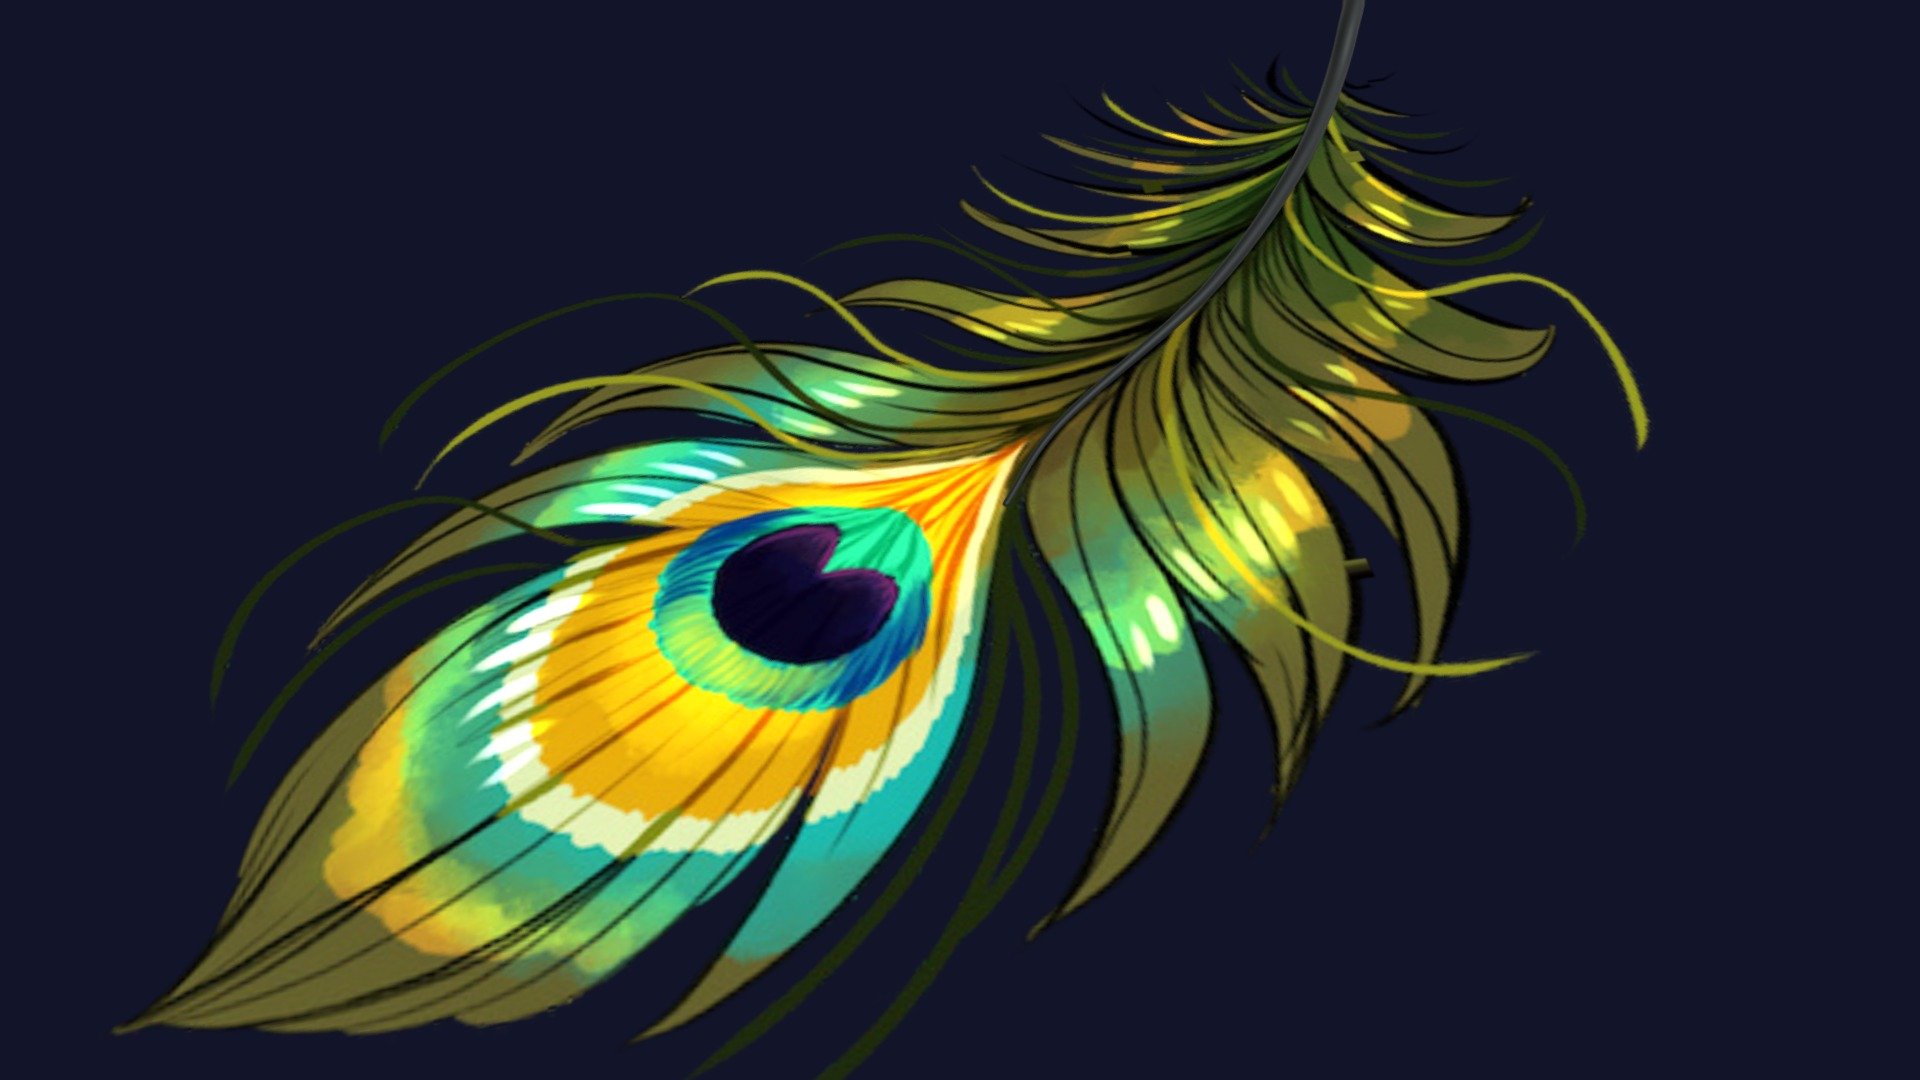 Peacock Feather 3d free peafowl

Ilustración by AlphaStryx: https://www.deviantart.com/alphastryx/art/Peacock-Feather-30-B-769052518 - Peacock feather v.3 pluma pavo real 3d free - Download Free 3D model by vmmaniac 3d model